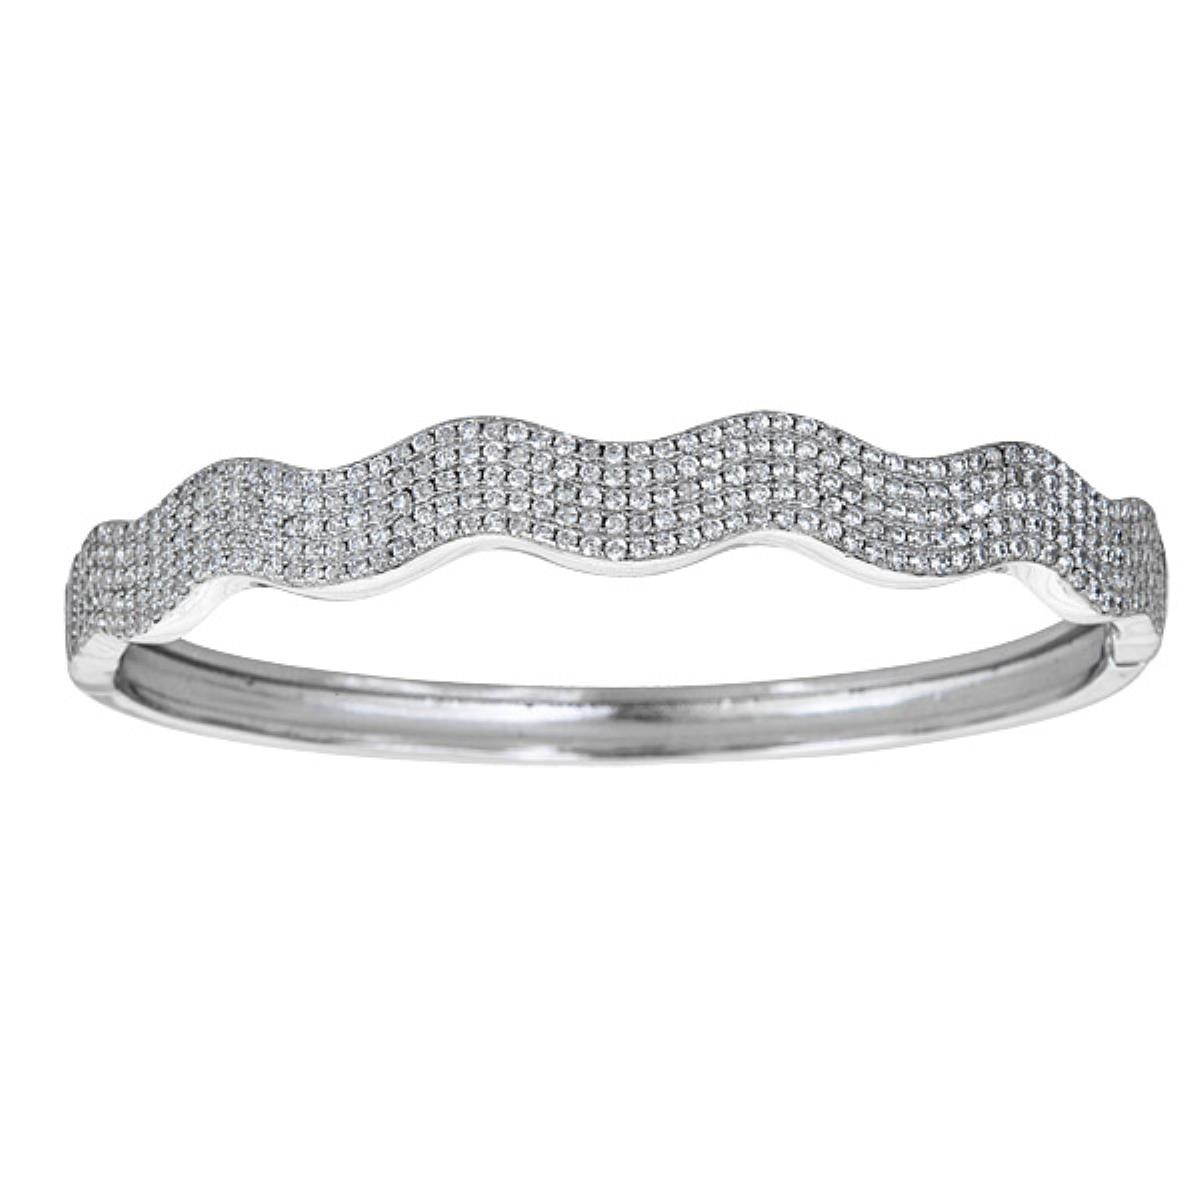 Sterling Silver Wavy Pave Hinged Bangle